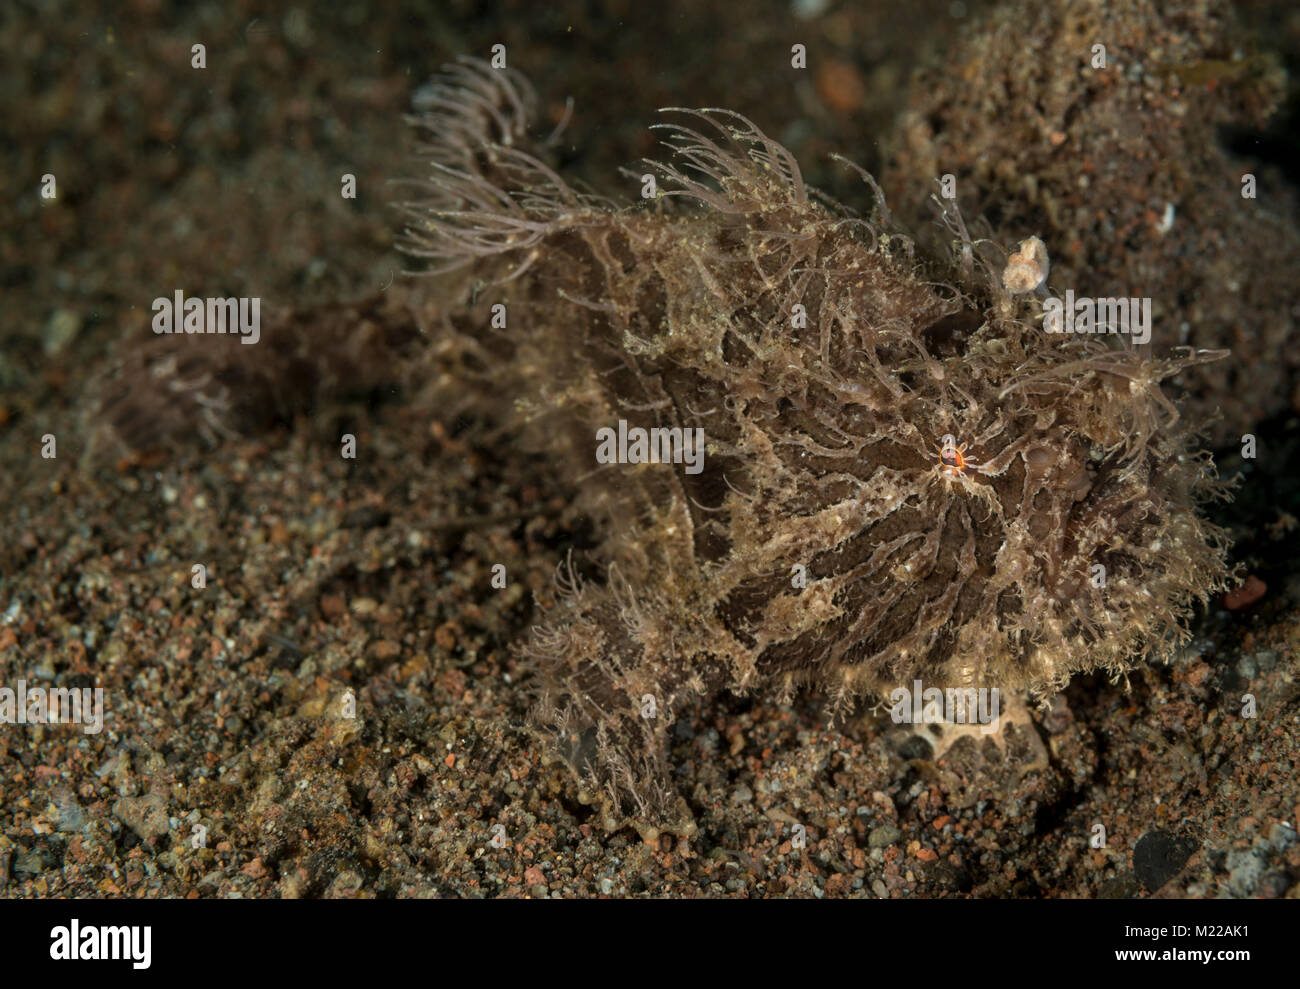 Hairy frogfish hiding in plain sight Stock Photo